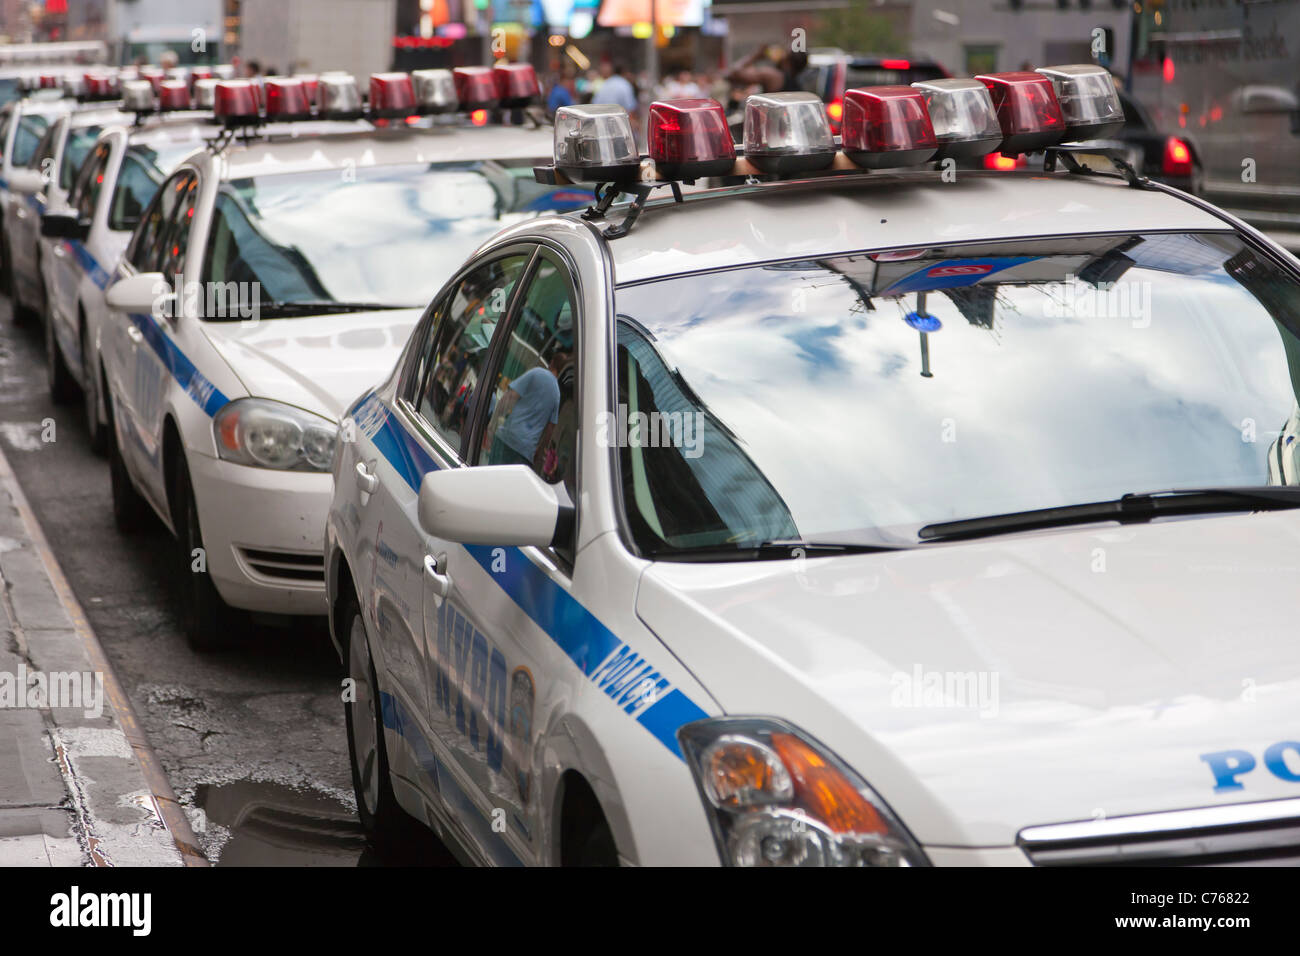 New York Police Department (NYPD) police cars line a street in New York City. Stock Photo